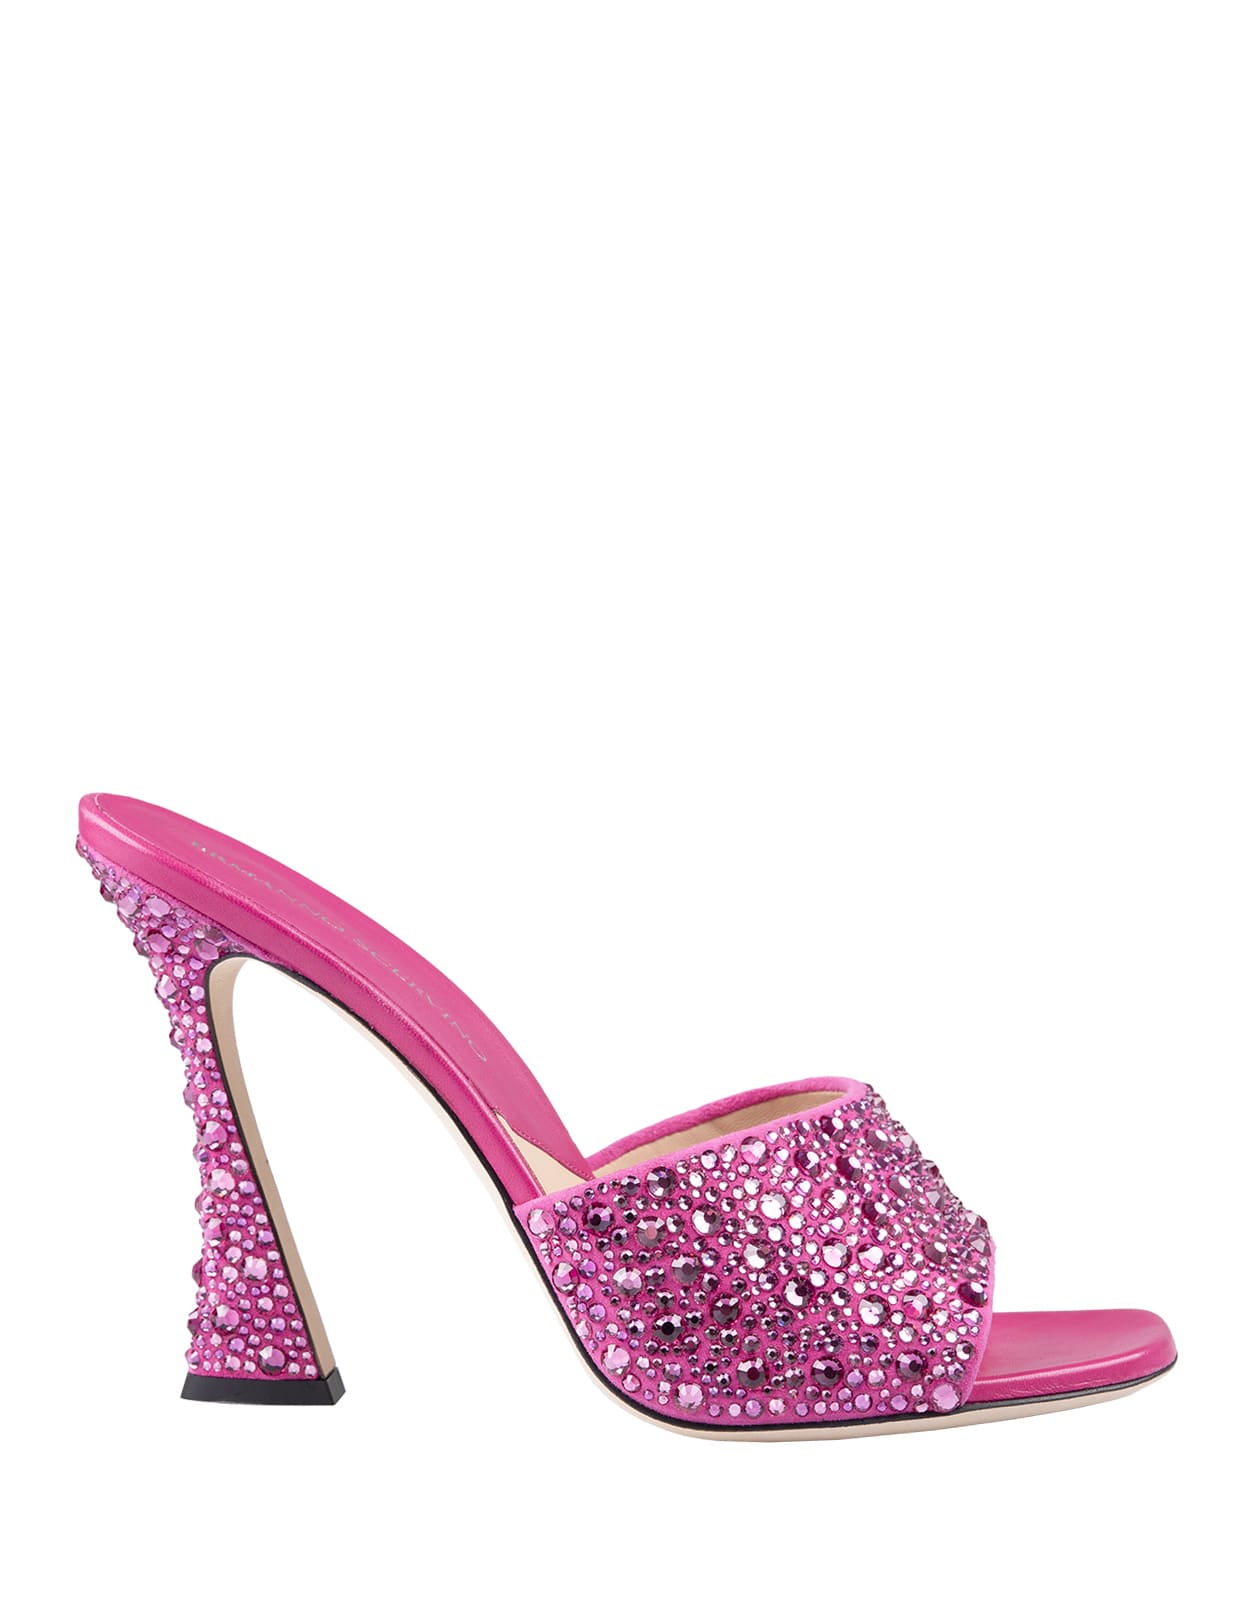 Fuchsia Mules With Crystals